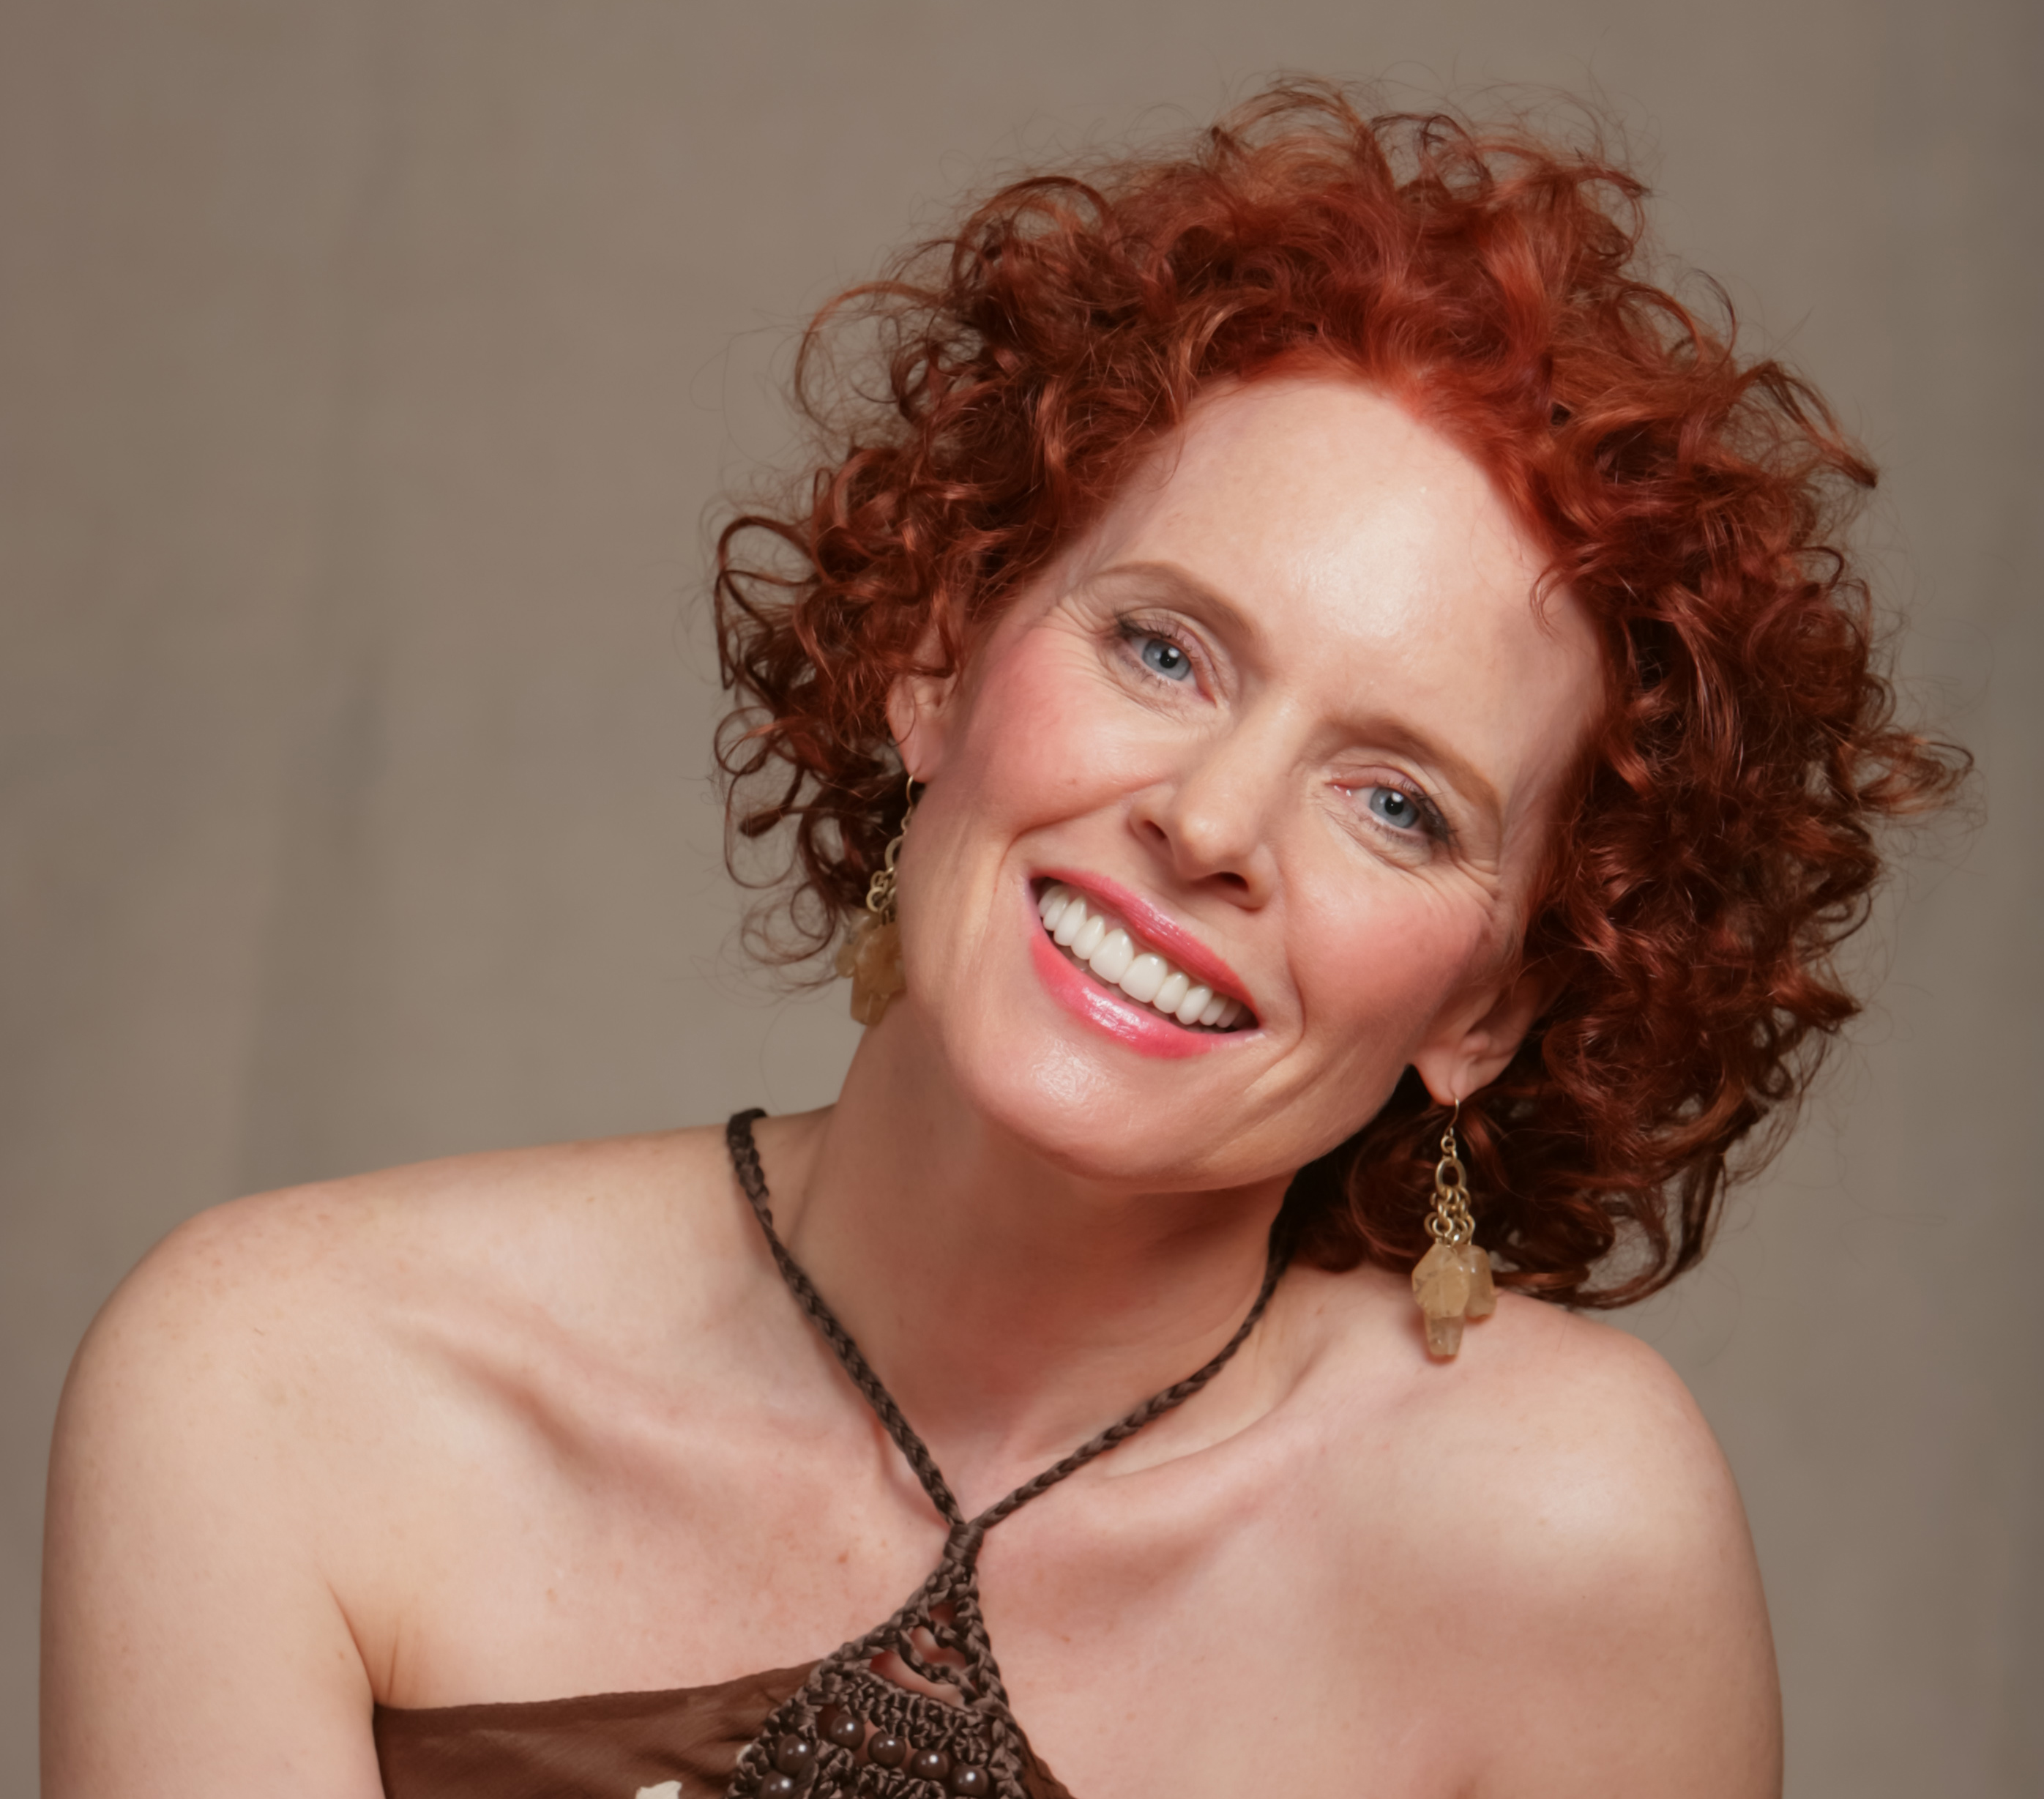 Woman with red, curly hair tilting her head and smiling. 